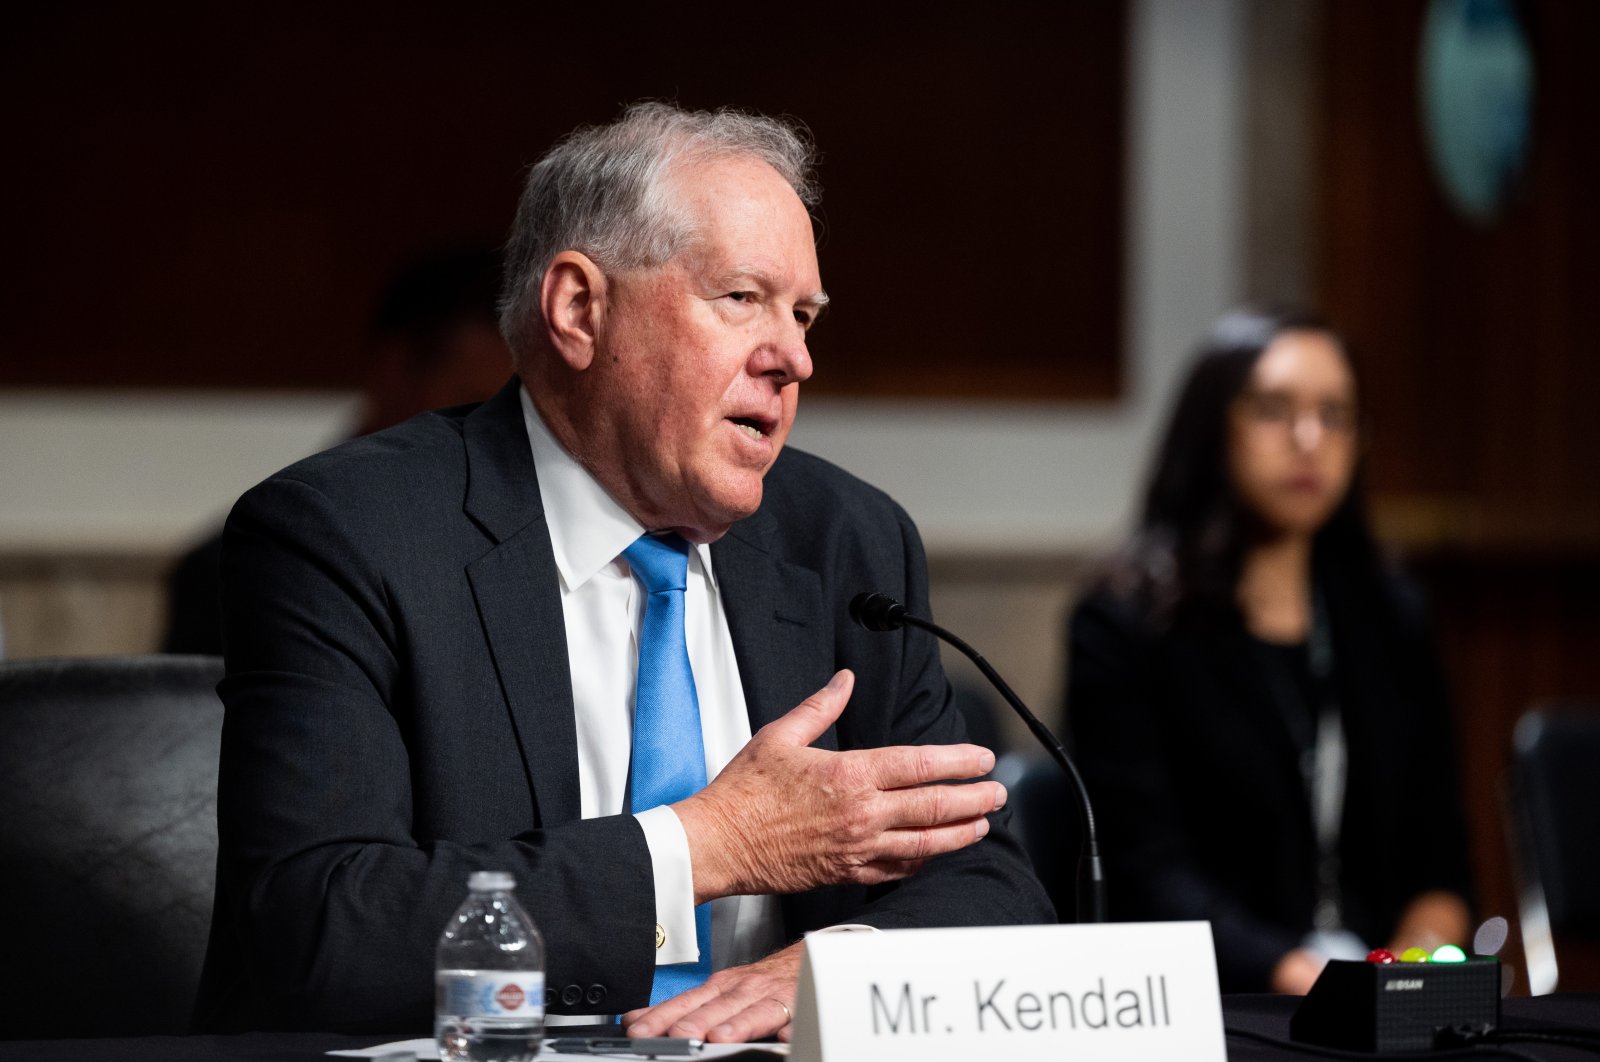 Frank Kendall III, the nominee for secretary of the Air Force, speaks at a hearing of the Senate Armed Services Committee, Washington, D.C., U.S, May 25, 2021. (Reuters Photo)